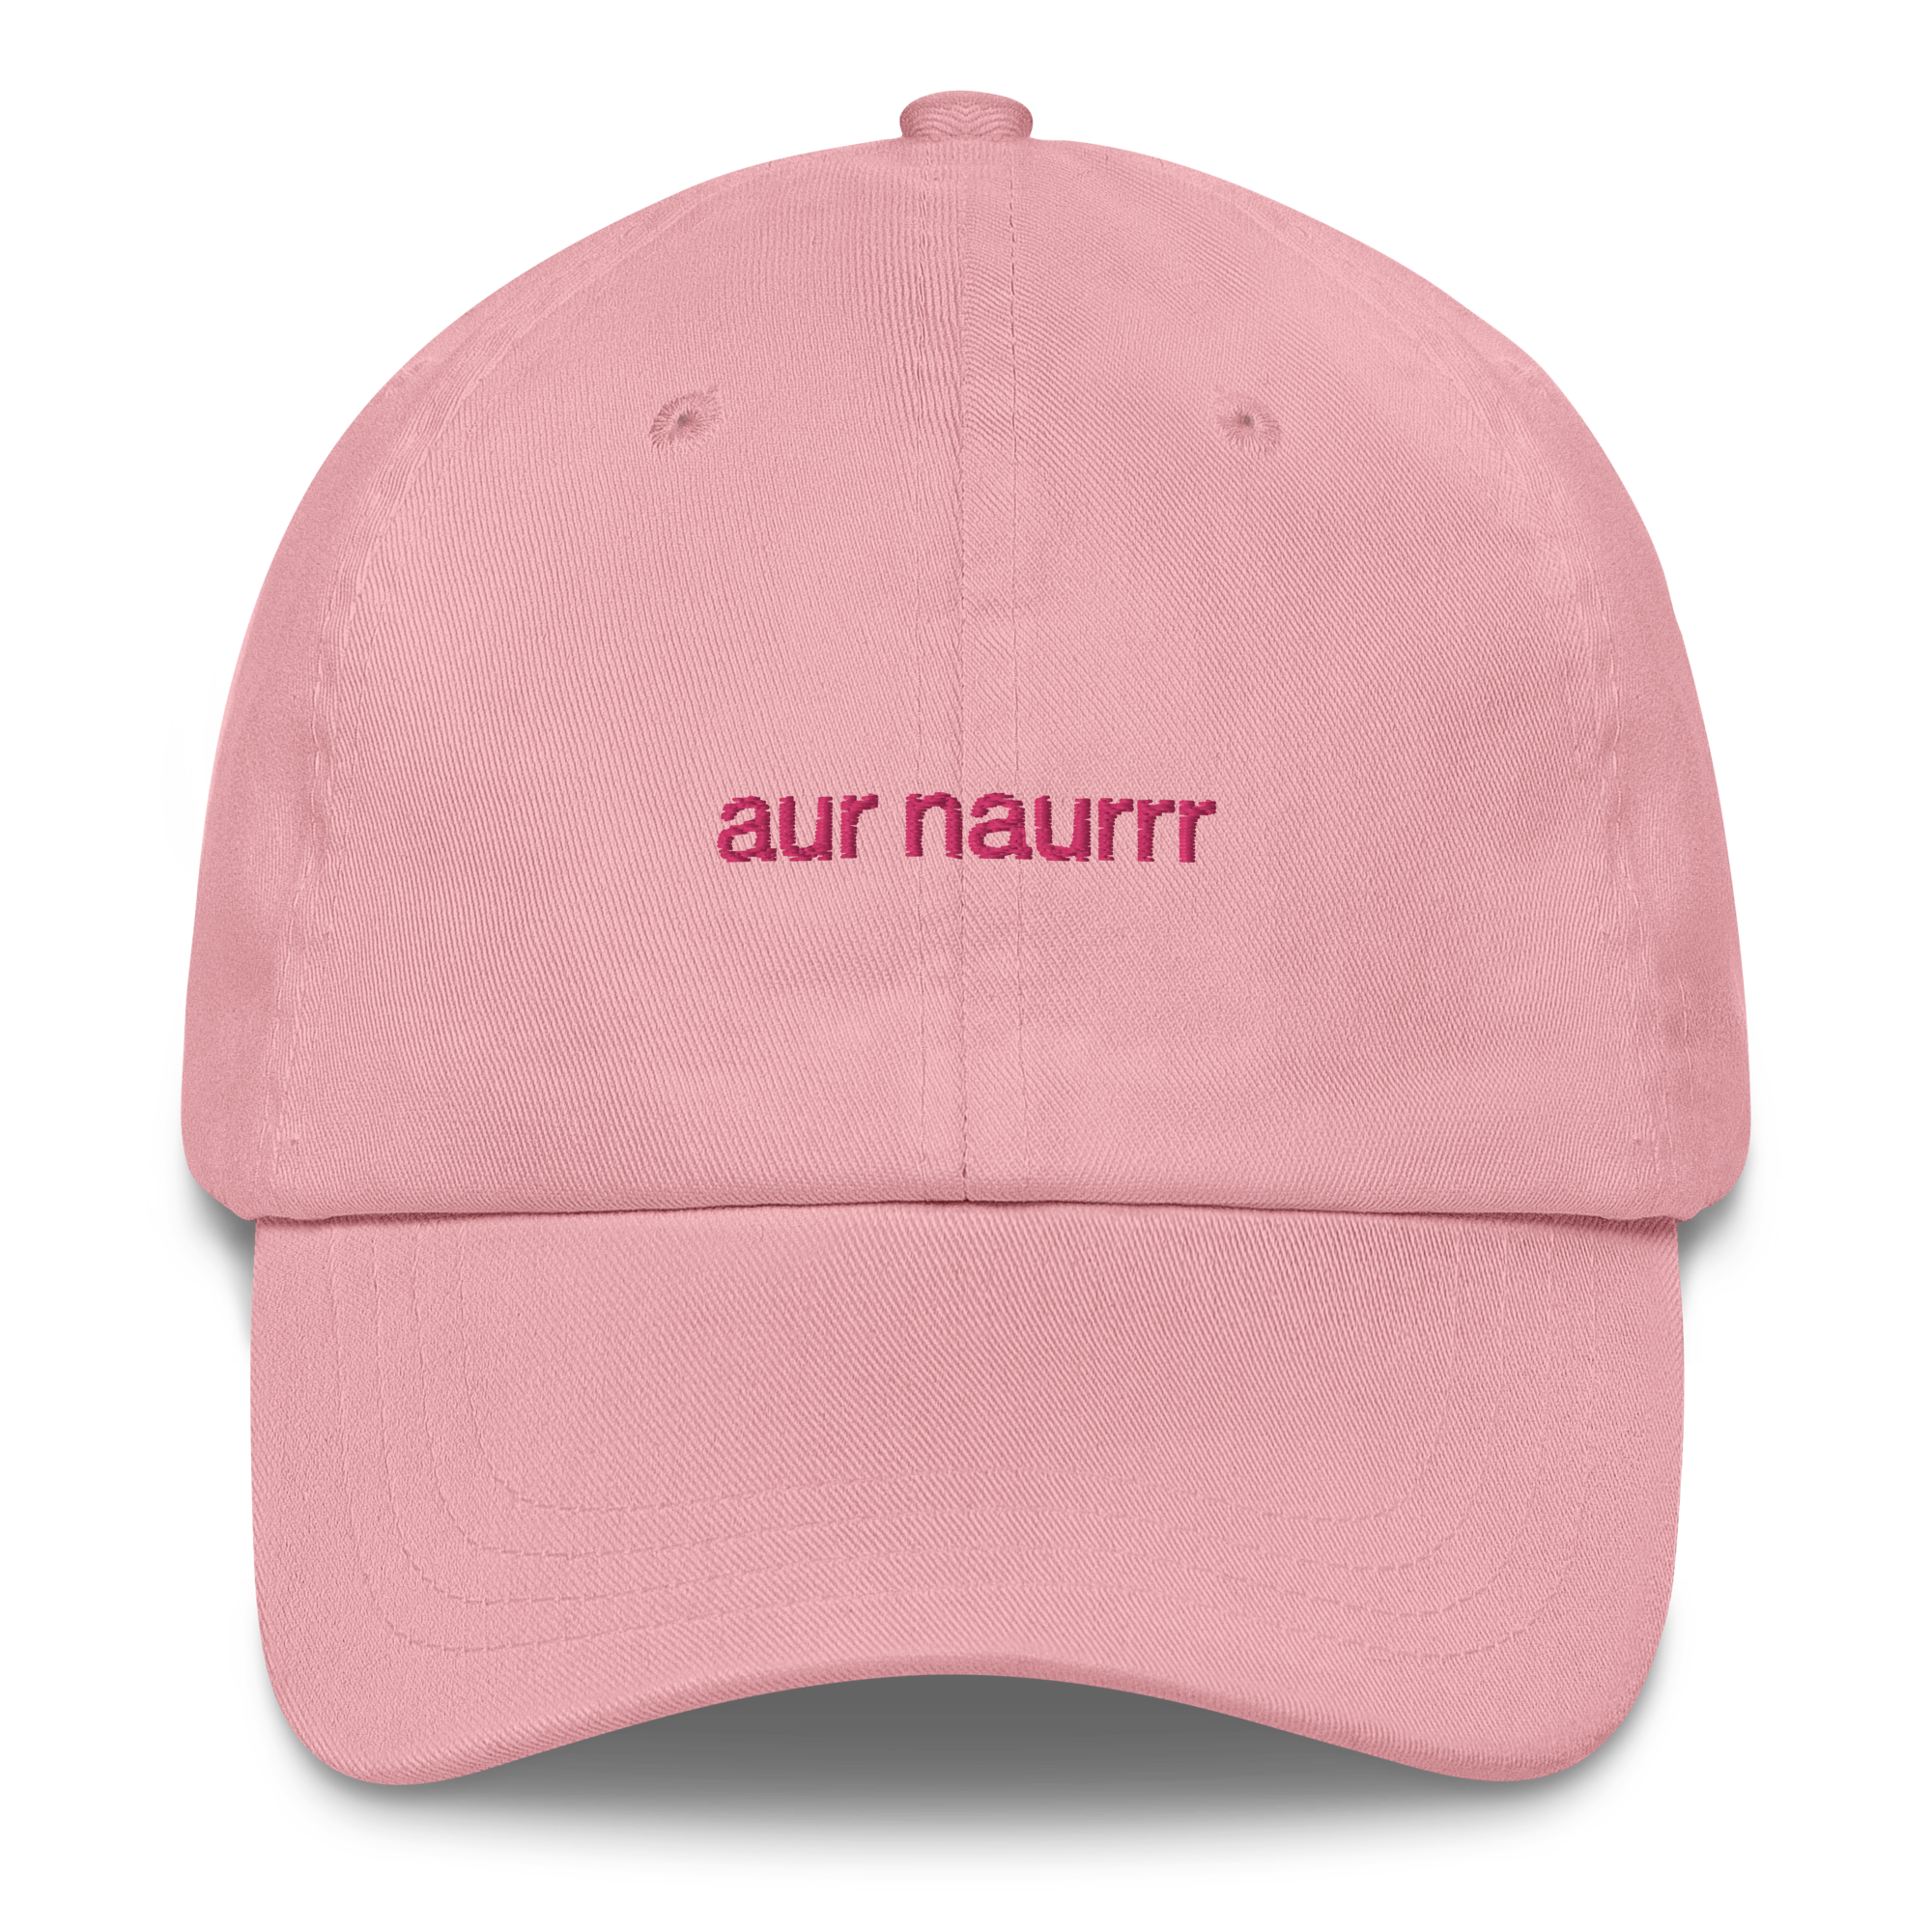 classic-dad-hat-pink-front-667eebd1c71f6.png